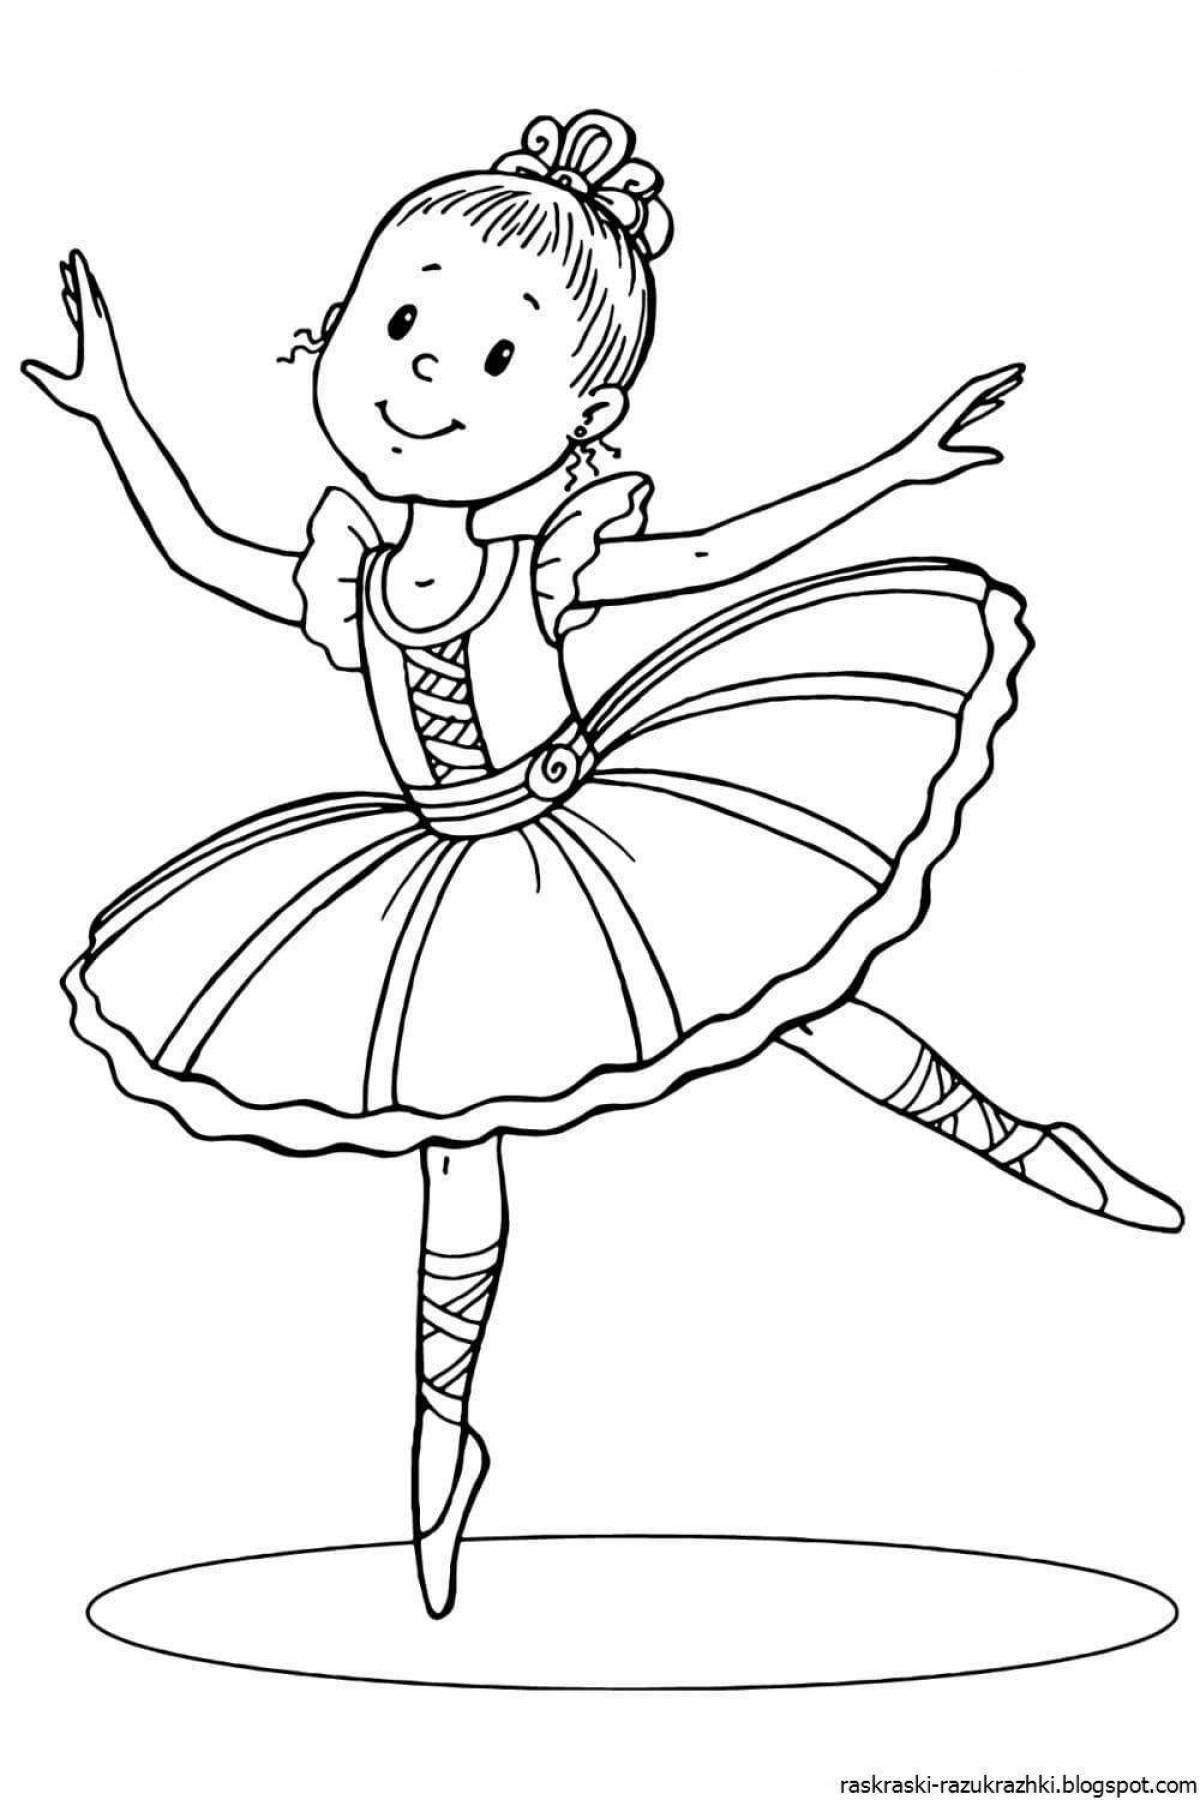 Coloring page dazzling ballet